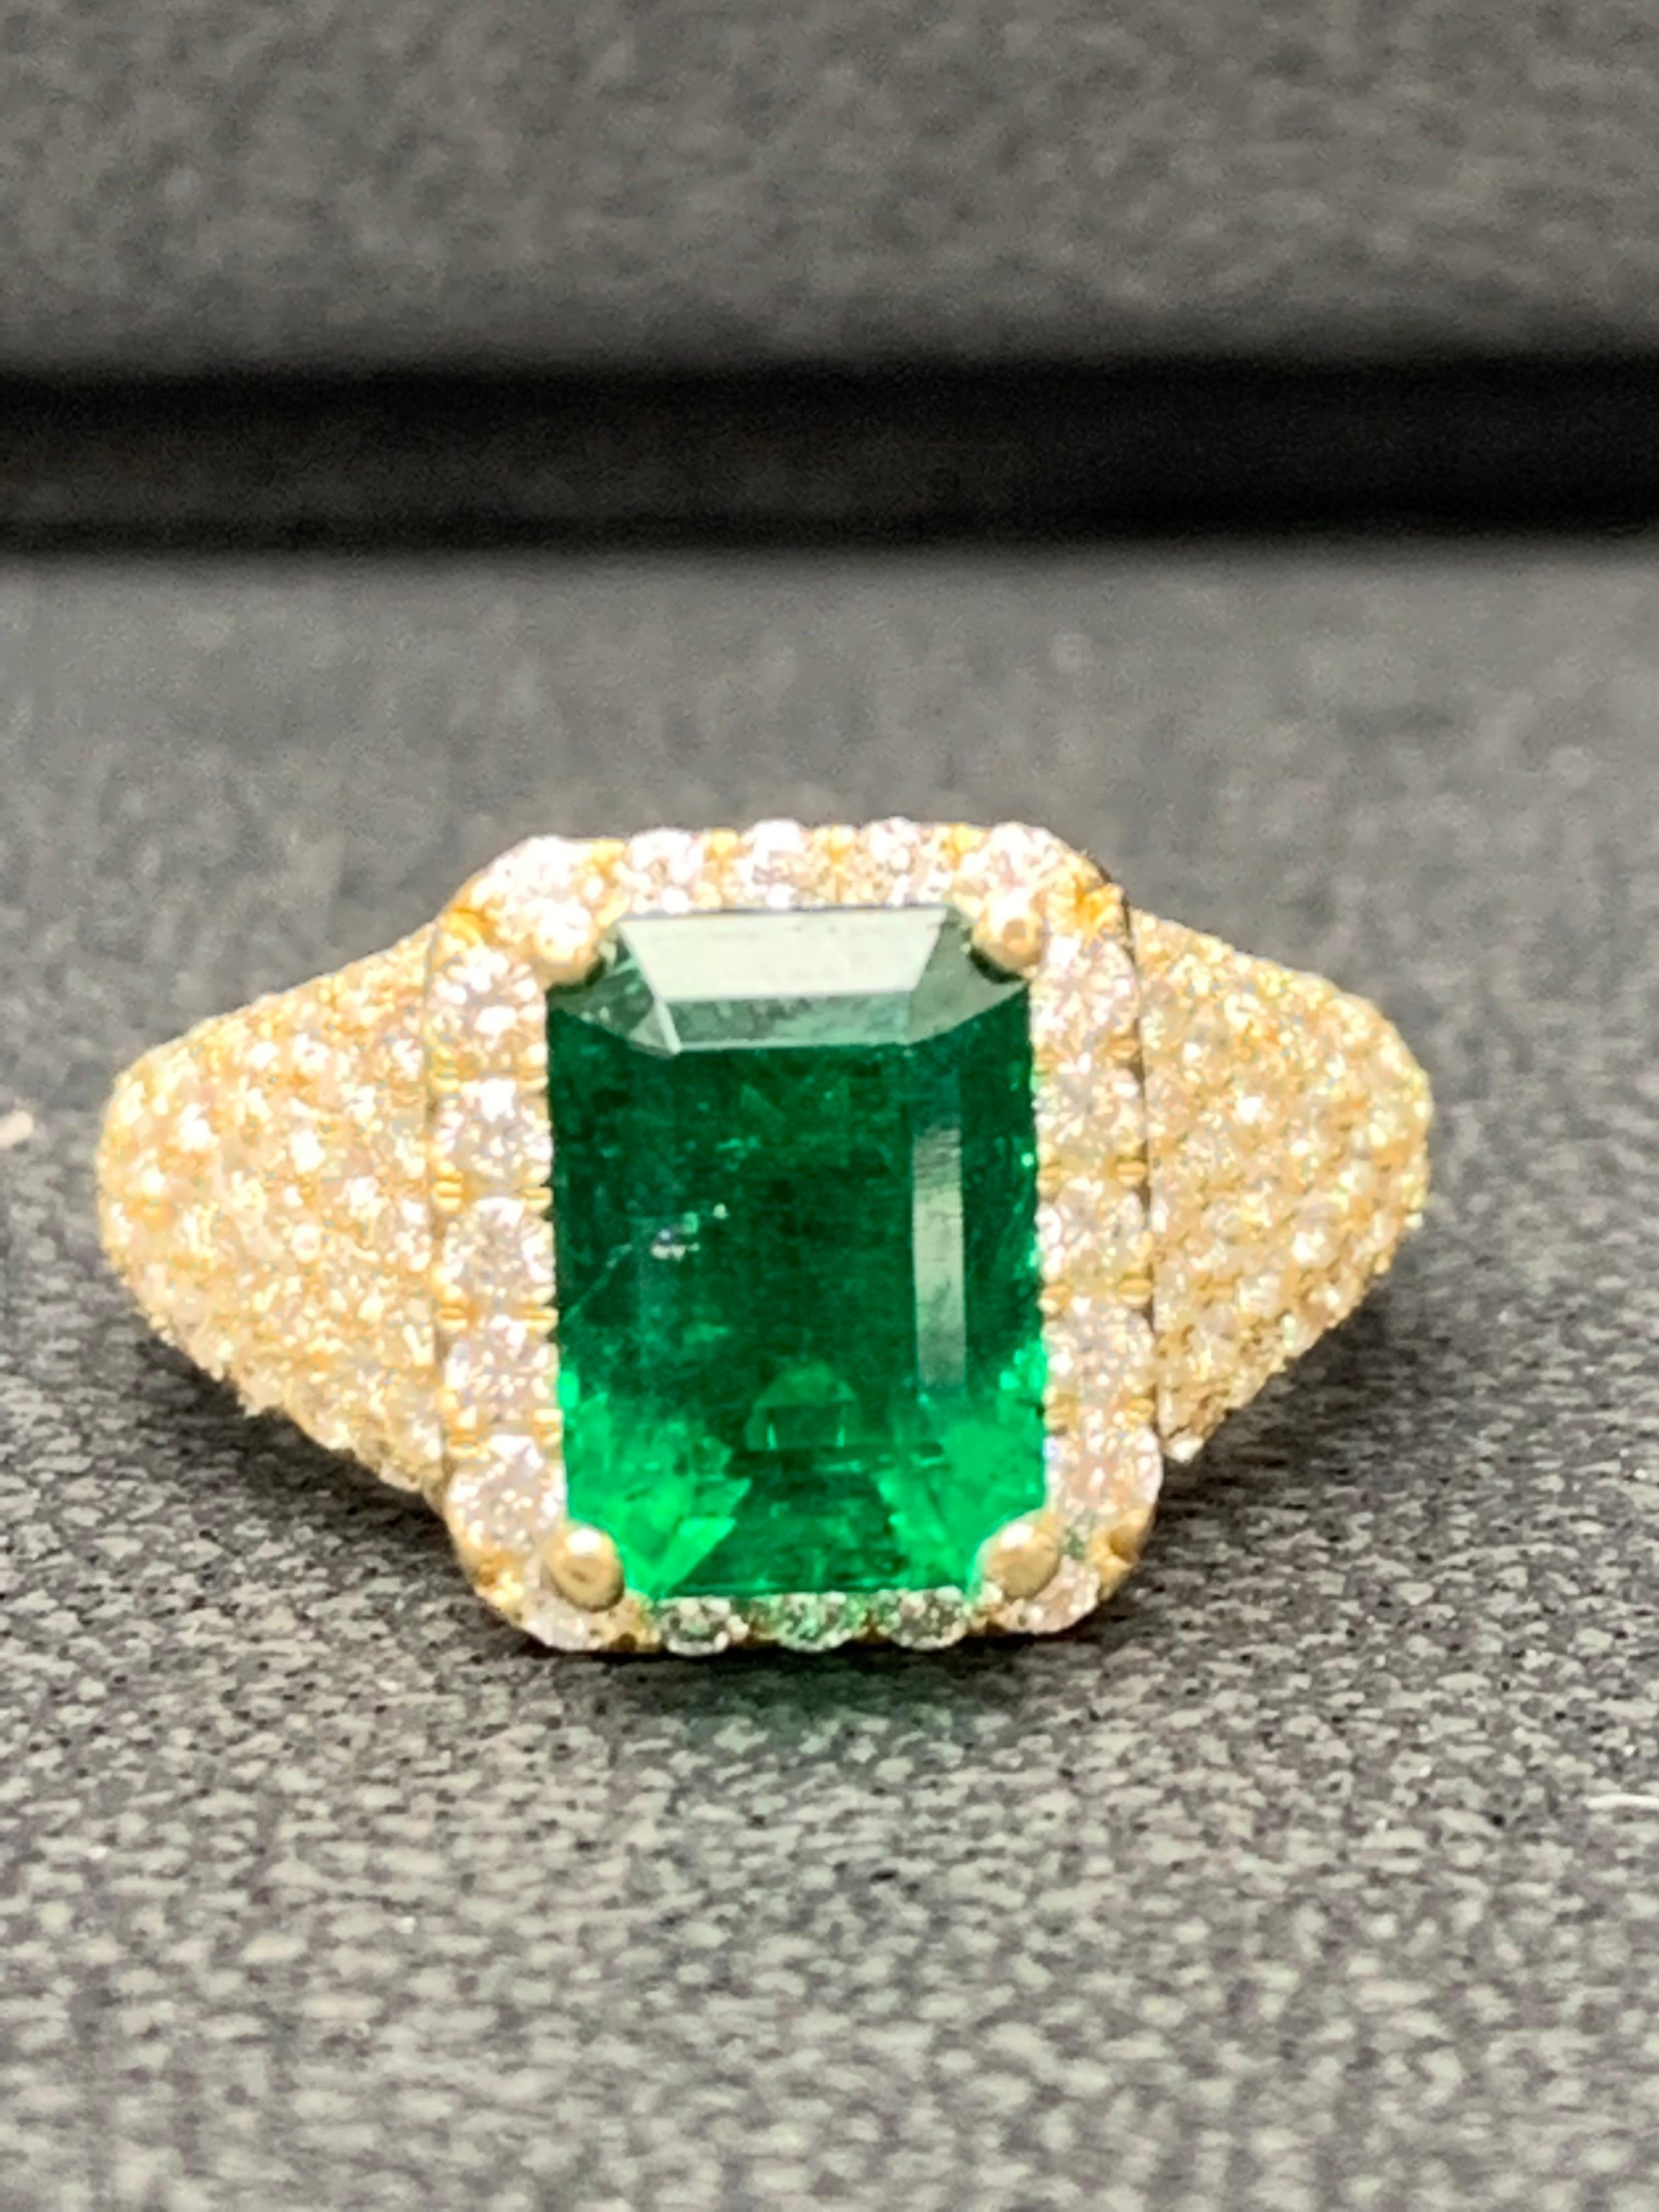 A uniquely-designed ring showcasing a 2.08 carat Emerald Cut Emerald. Surrounding the center stone are brilliant-cut round diamonds in an 18 karat yellow gold mounting. 146 diamonds weigh 2.01 carat in total.